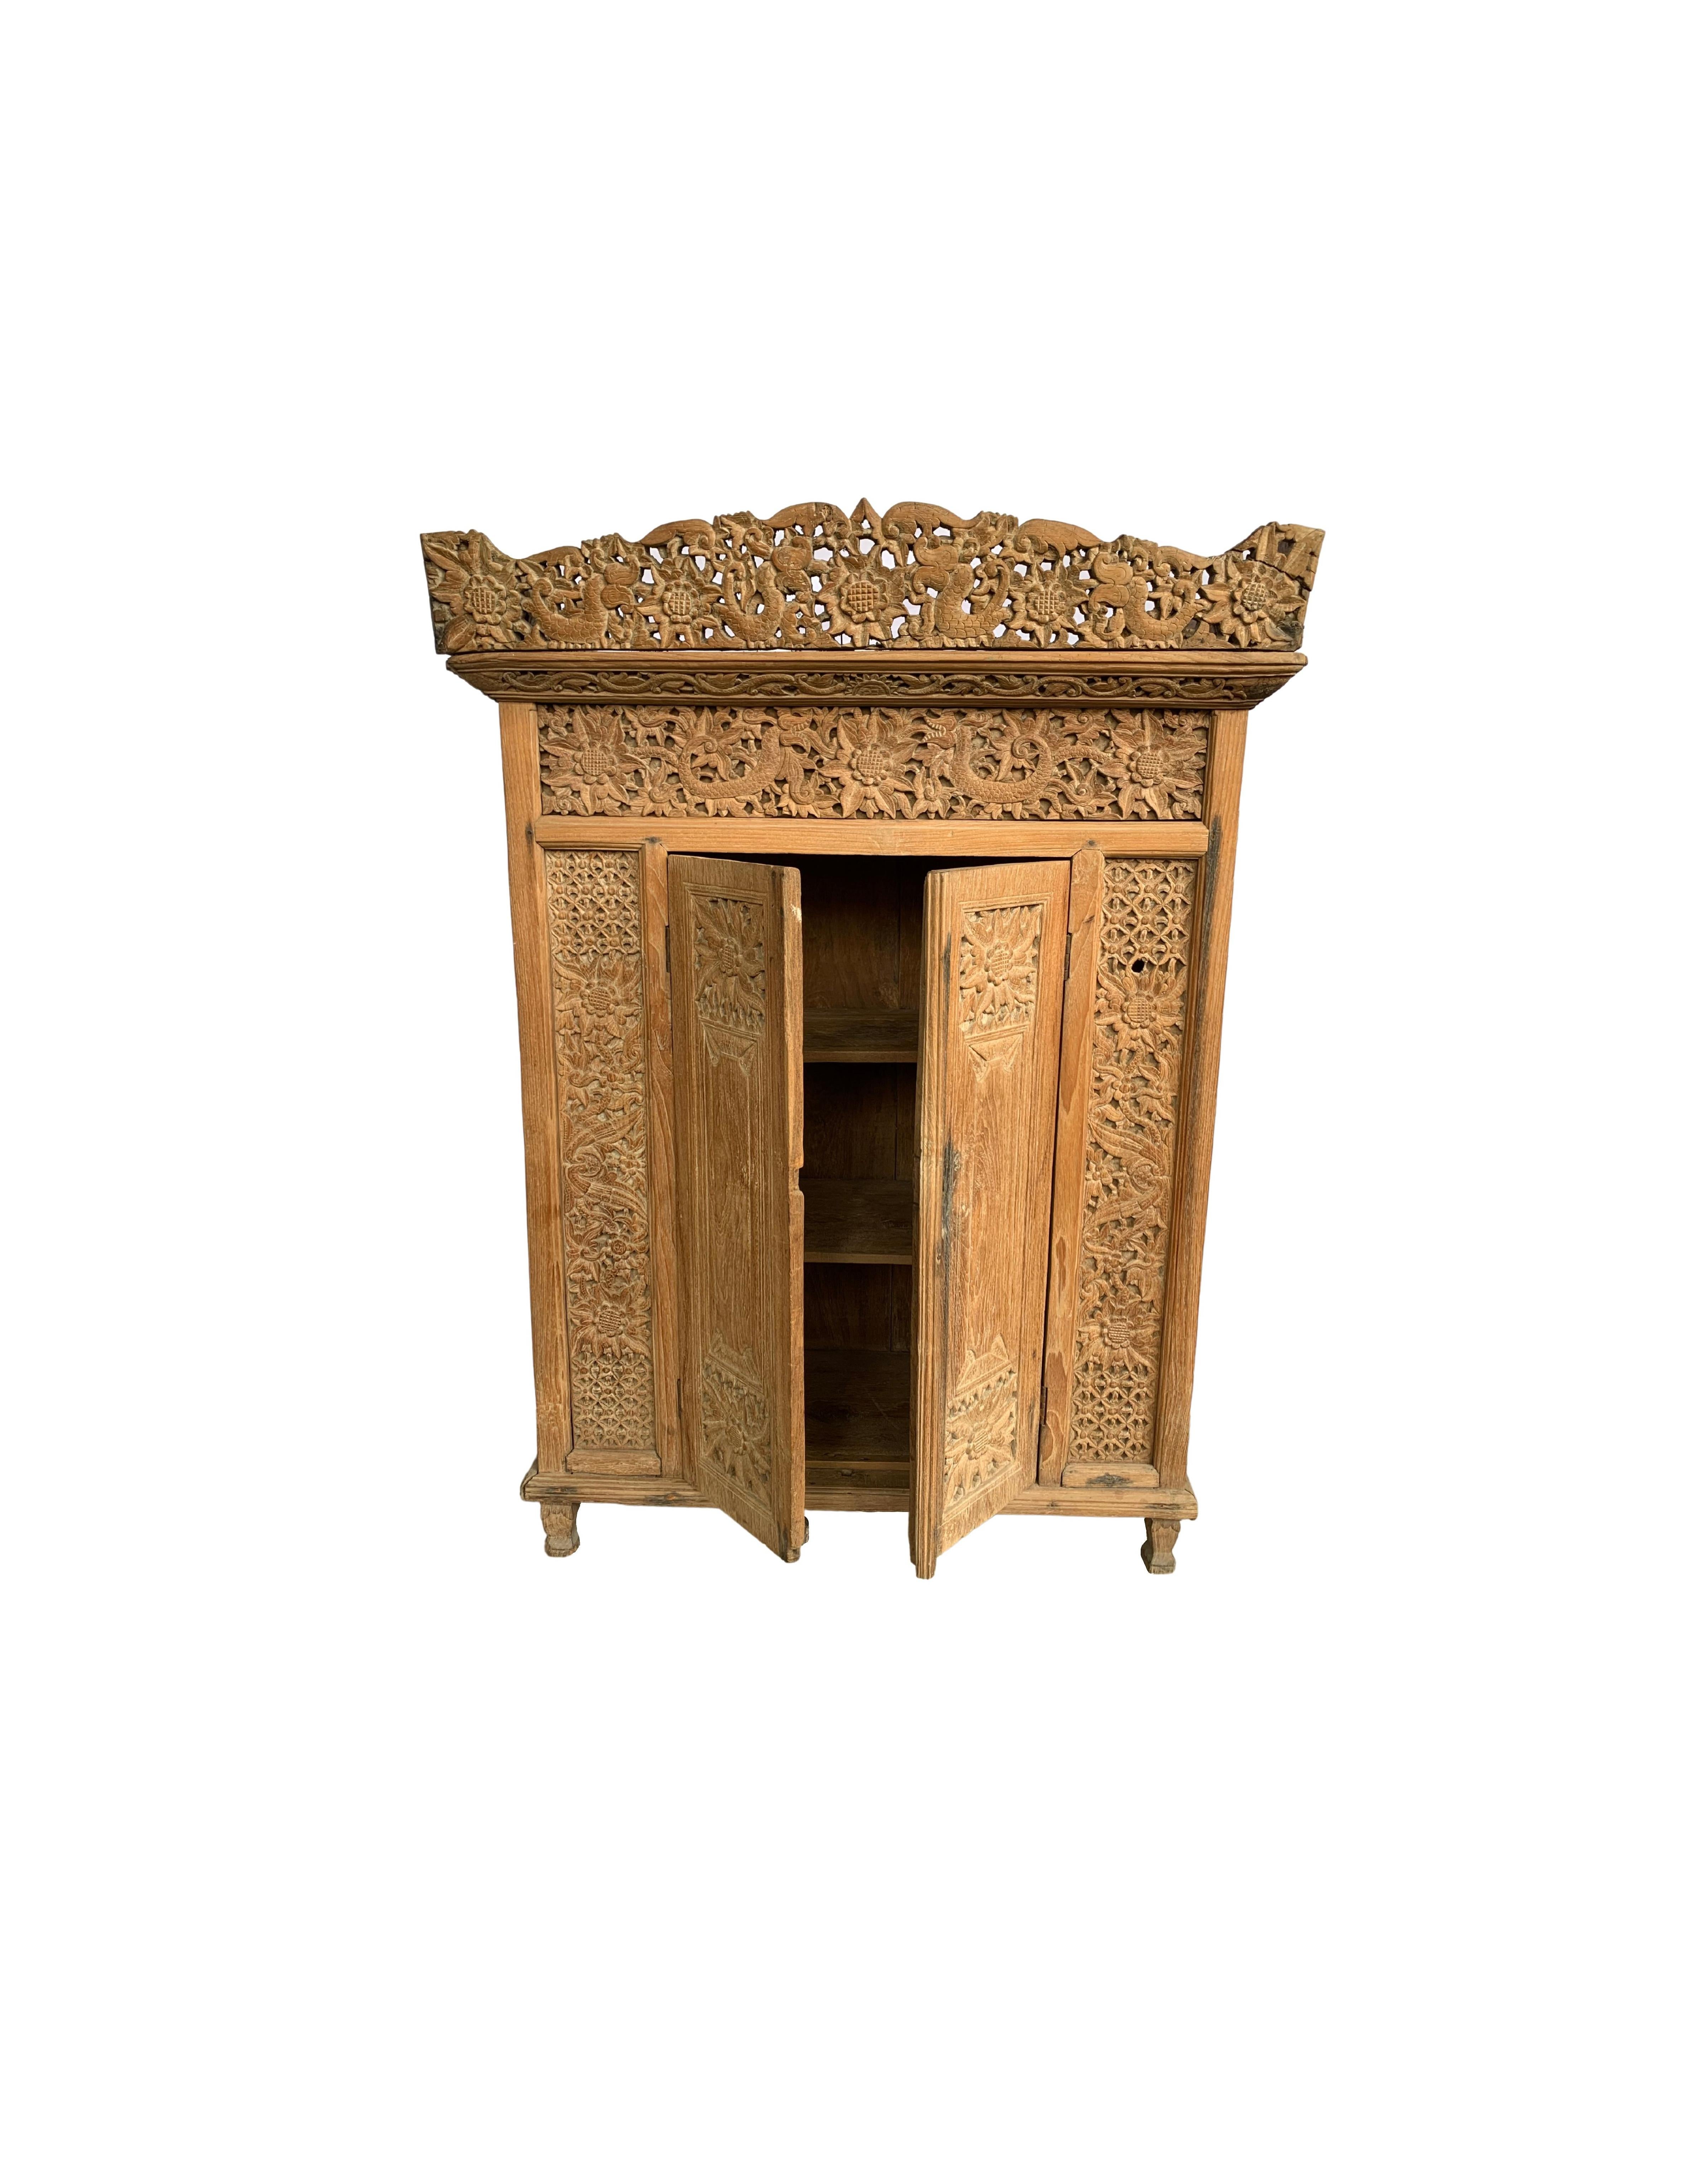 This teak cabinet dates to the Mid-20th Century and features an elaborate exterior largely covered by hand-carved motifs. The motifs are largely floral but also features scaly mythical creatures. The front doors open to 3 interior shelves that